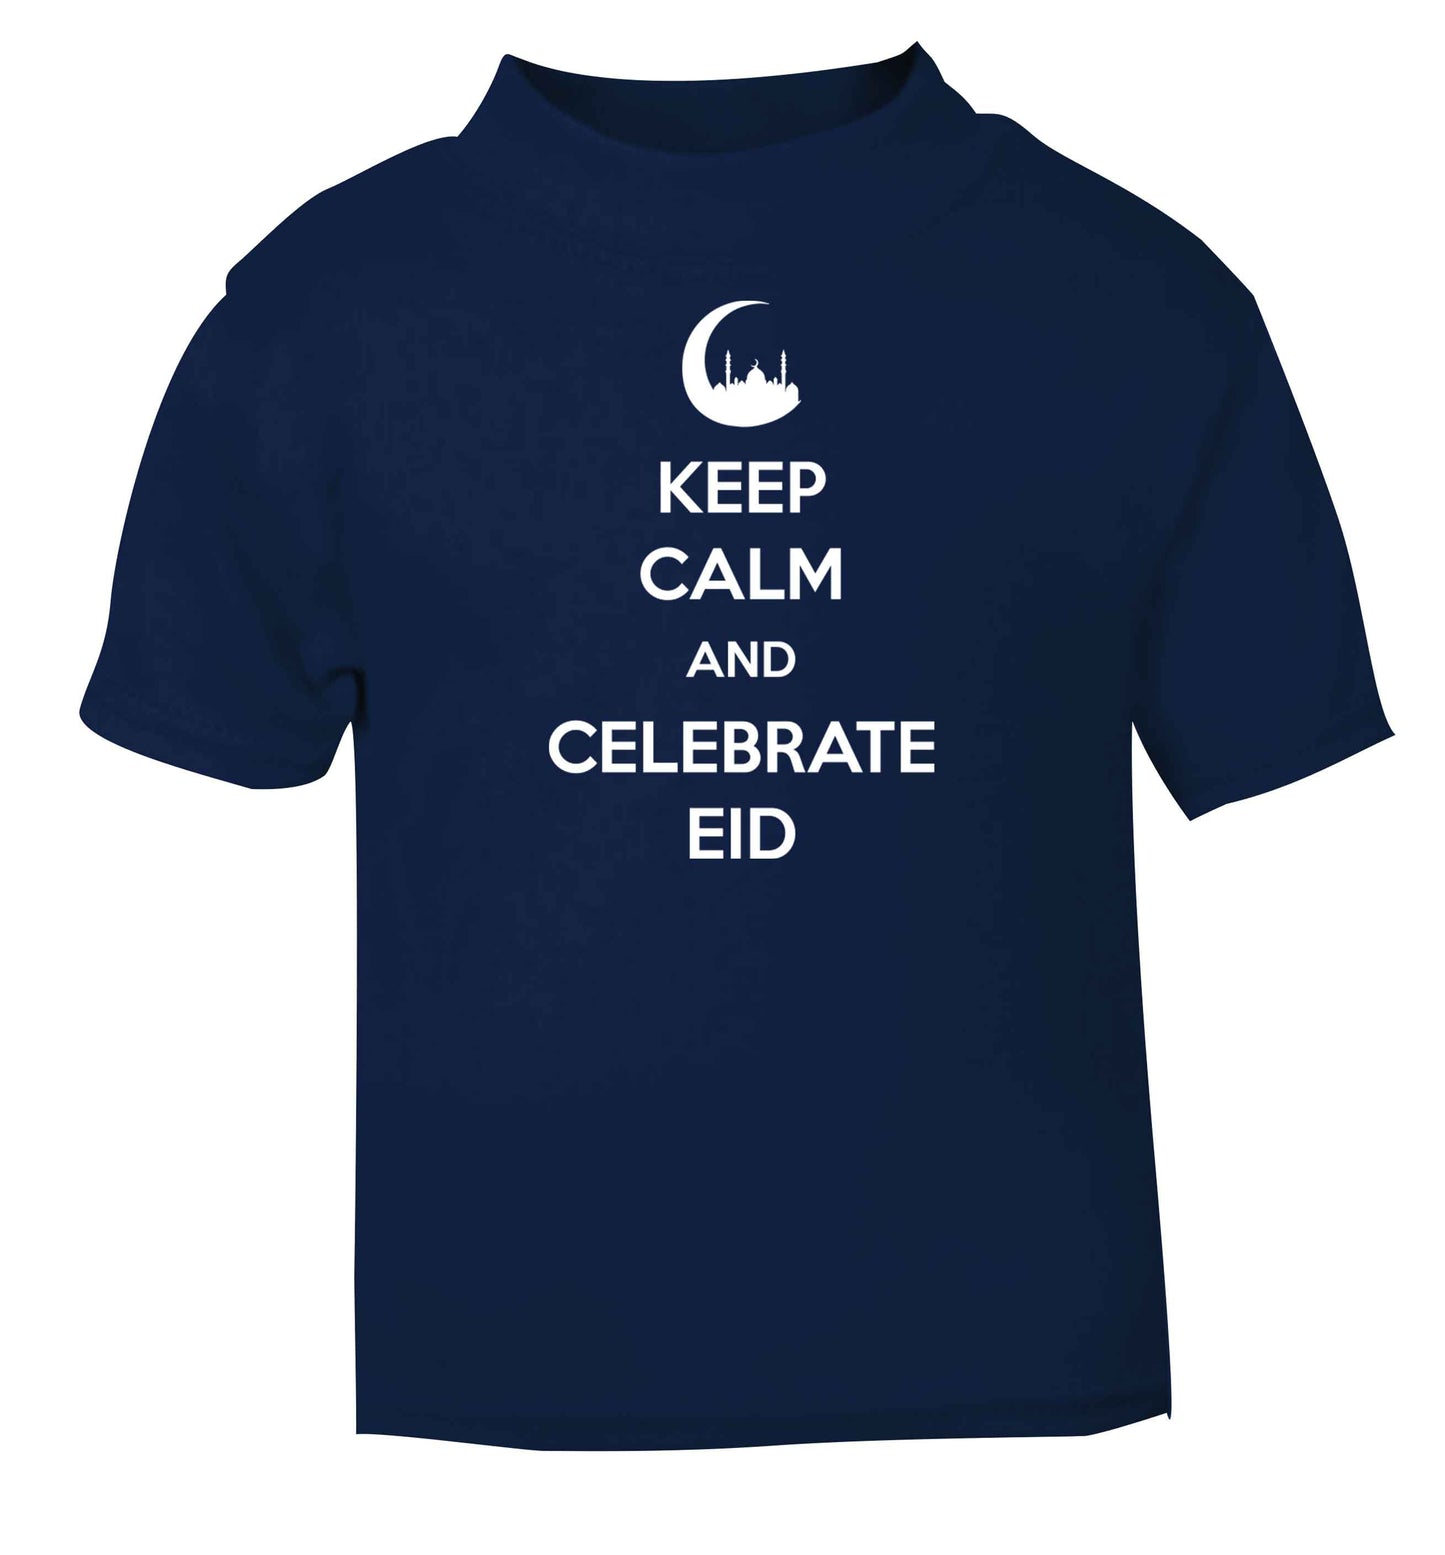 Keep calm and celebrate Eid navy baby toddler Tshirt 2 Years